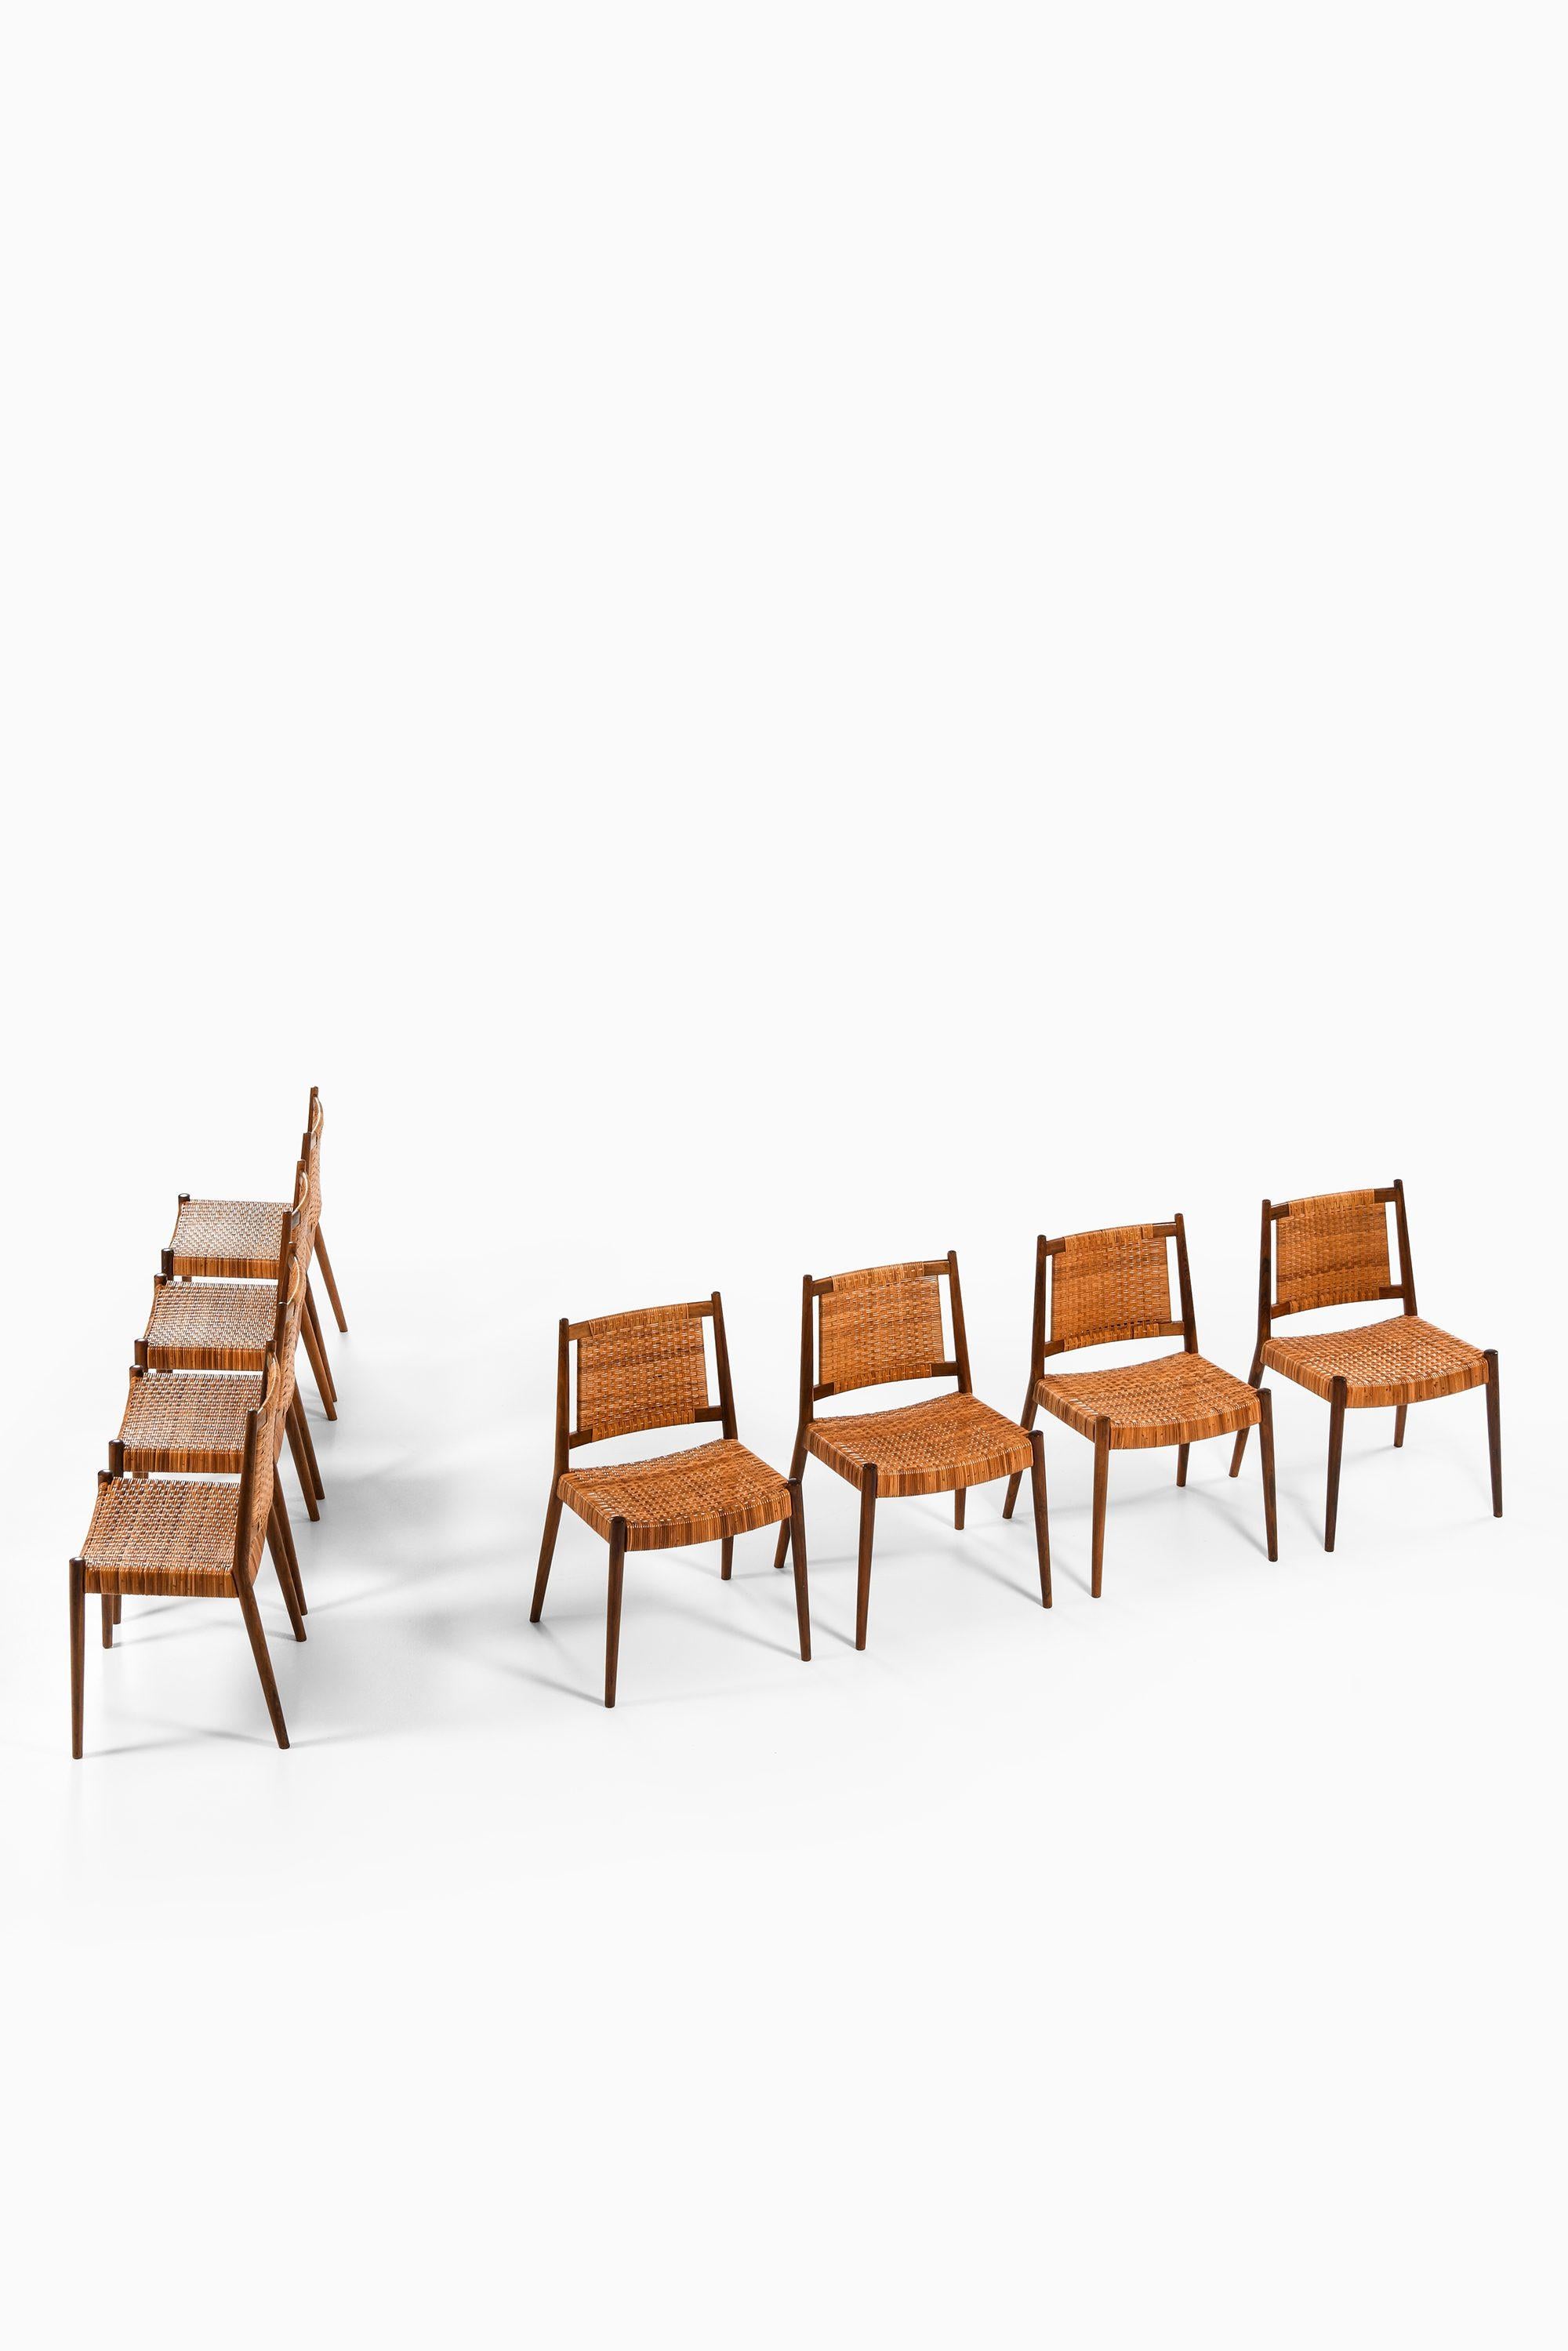 Set of 8 Dining Chairs in Solid Rosewood and Woven Cane by Steffan Syrach-Larsen, 1960

Additional Information:
Material: Solid rosewood and woven cane
Style: Mid century, Scandinavia
Produced by cabinetmaker Gustav Bertelsen in Denmark
Dimensions